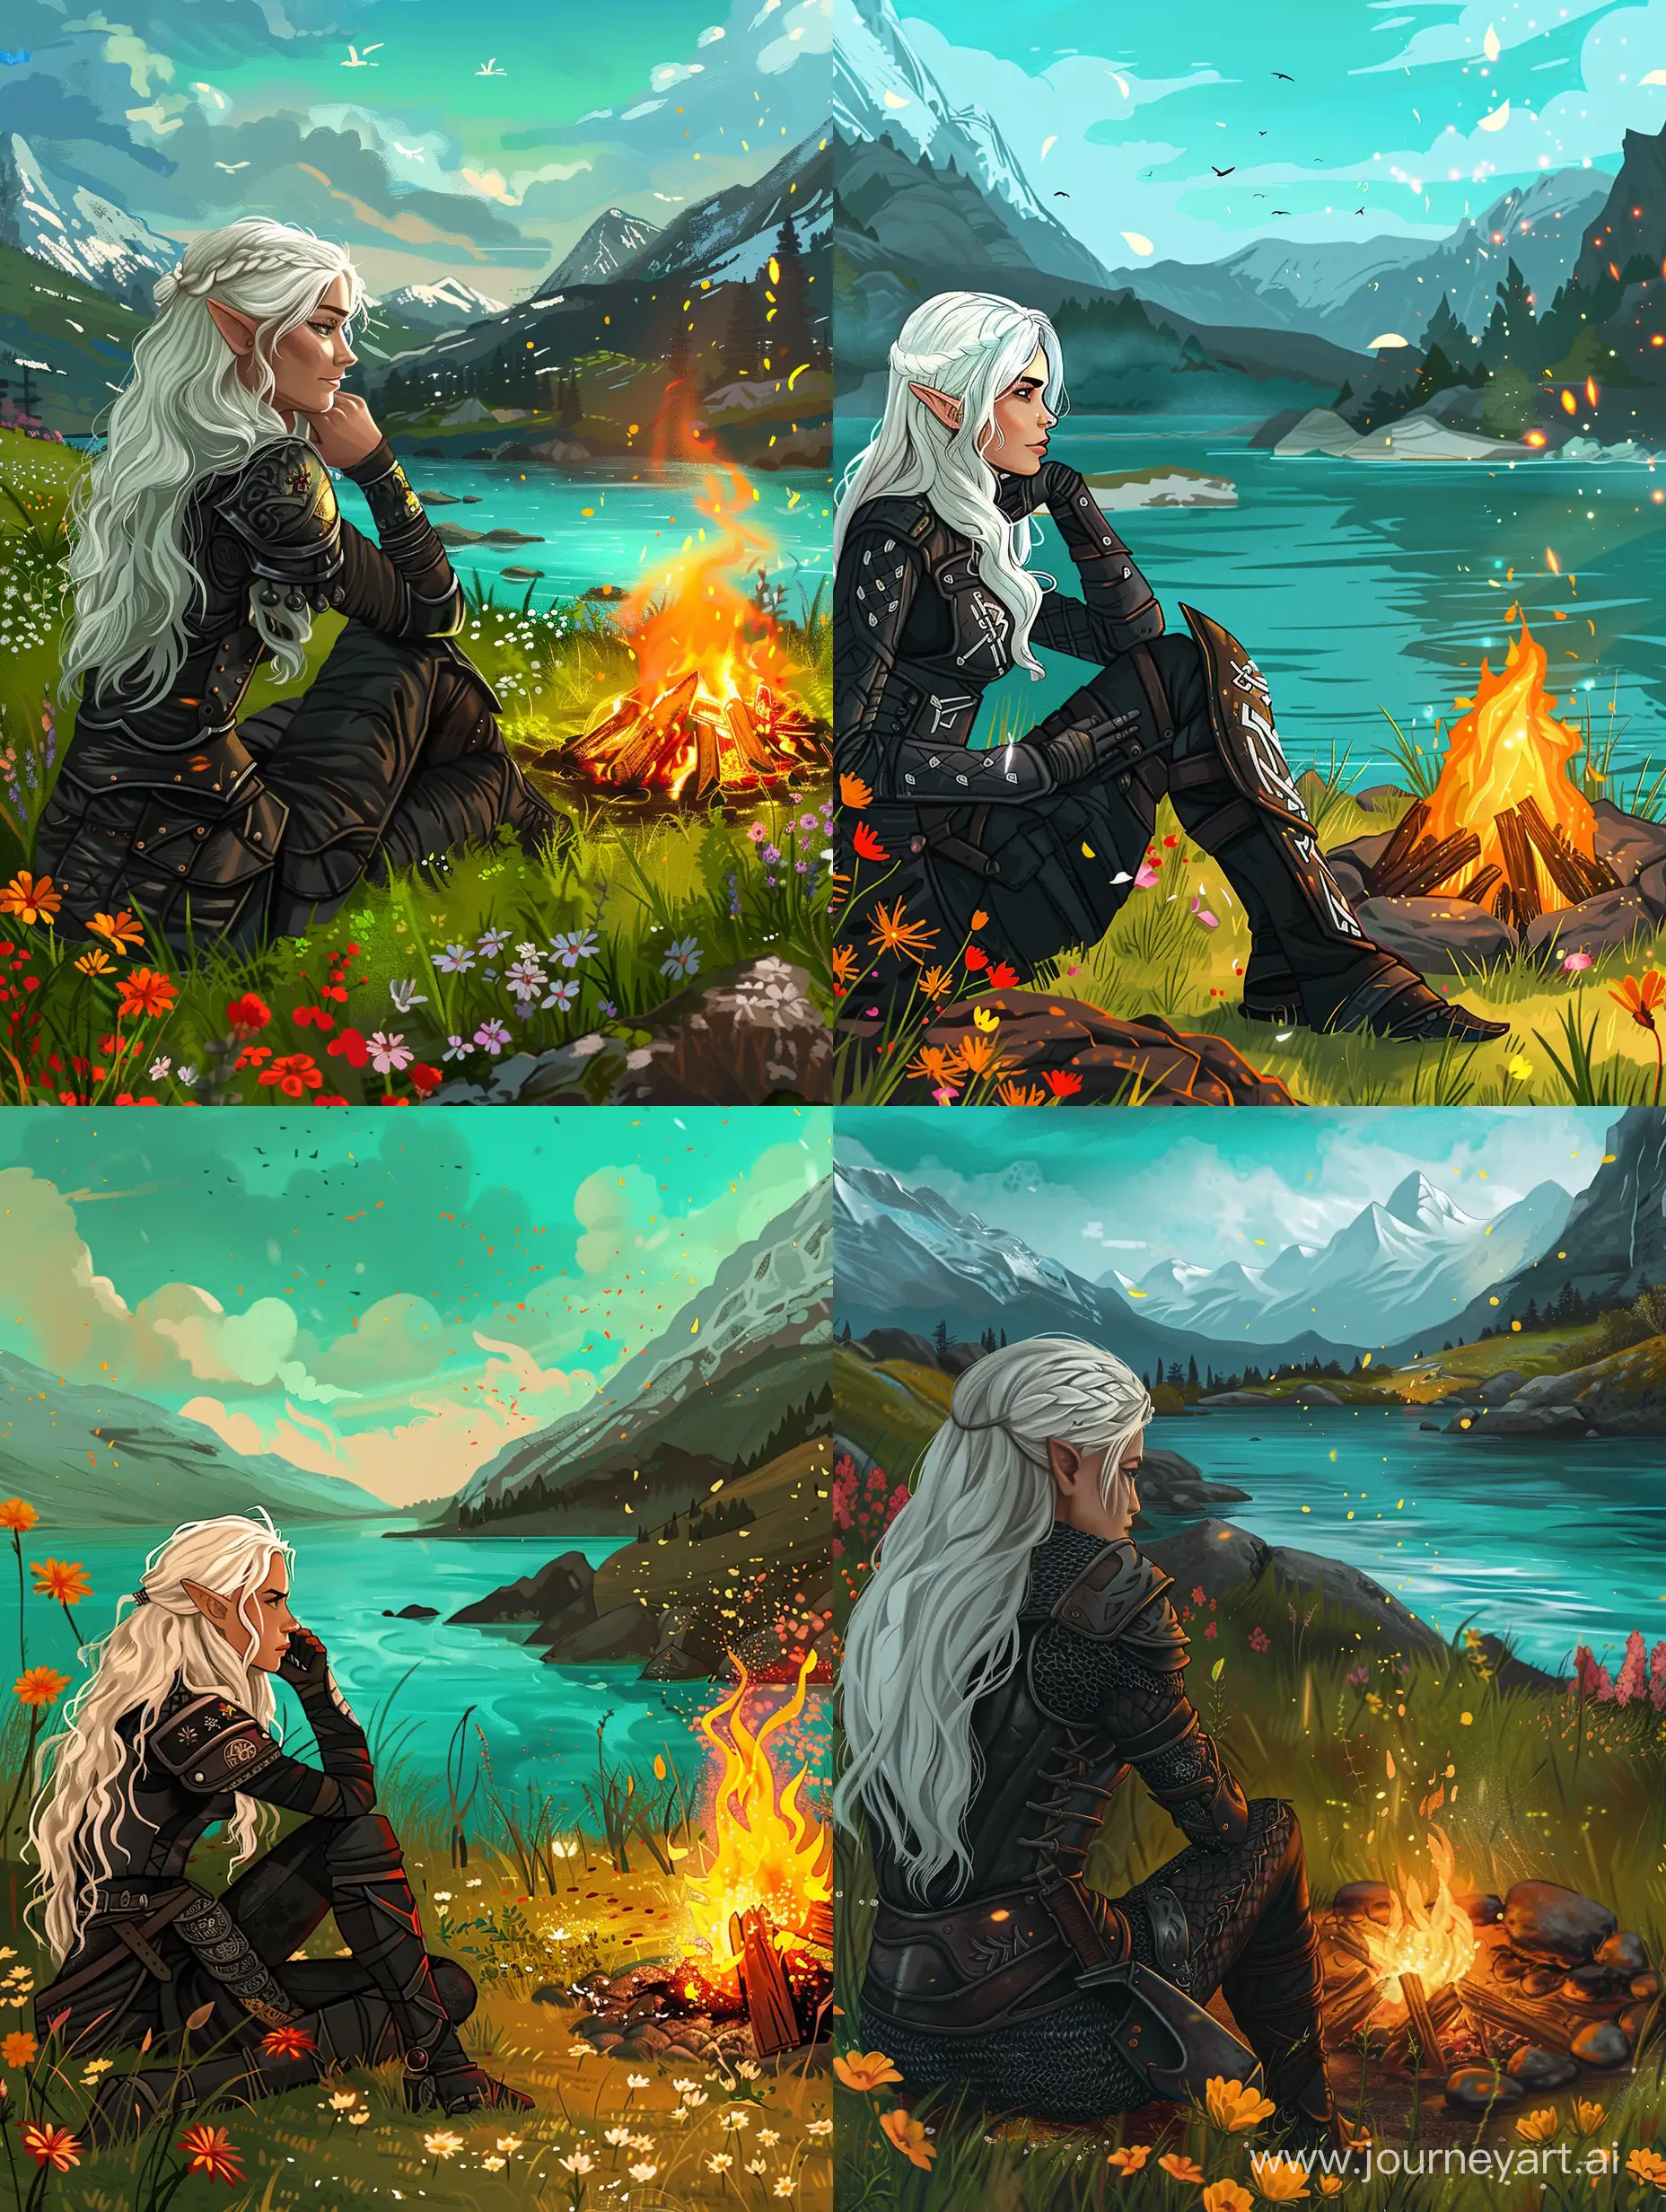 With snow-white hair, a Nordic Viking woman sitting by a campfire and thinking about her love in spring, skyrim background, spring and blooming flowers, dressed in black Skyrim armor, turquoise sky and golden mist near the mountains, funny and cute cartoon drawing, cinematic style -- s 50